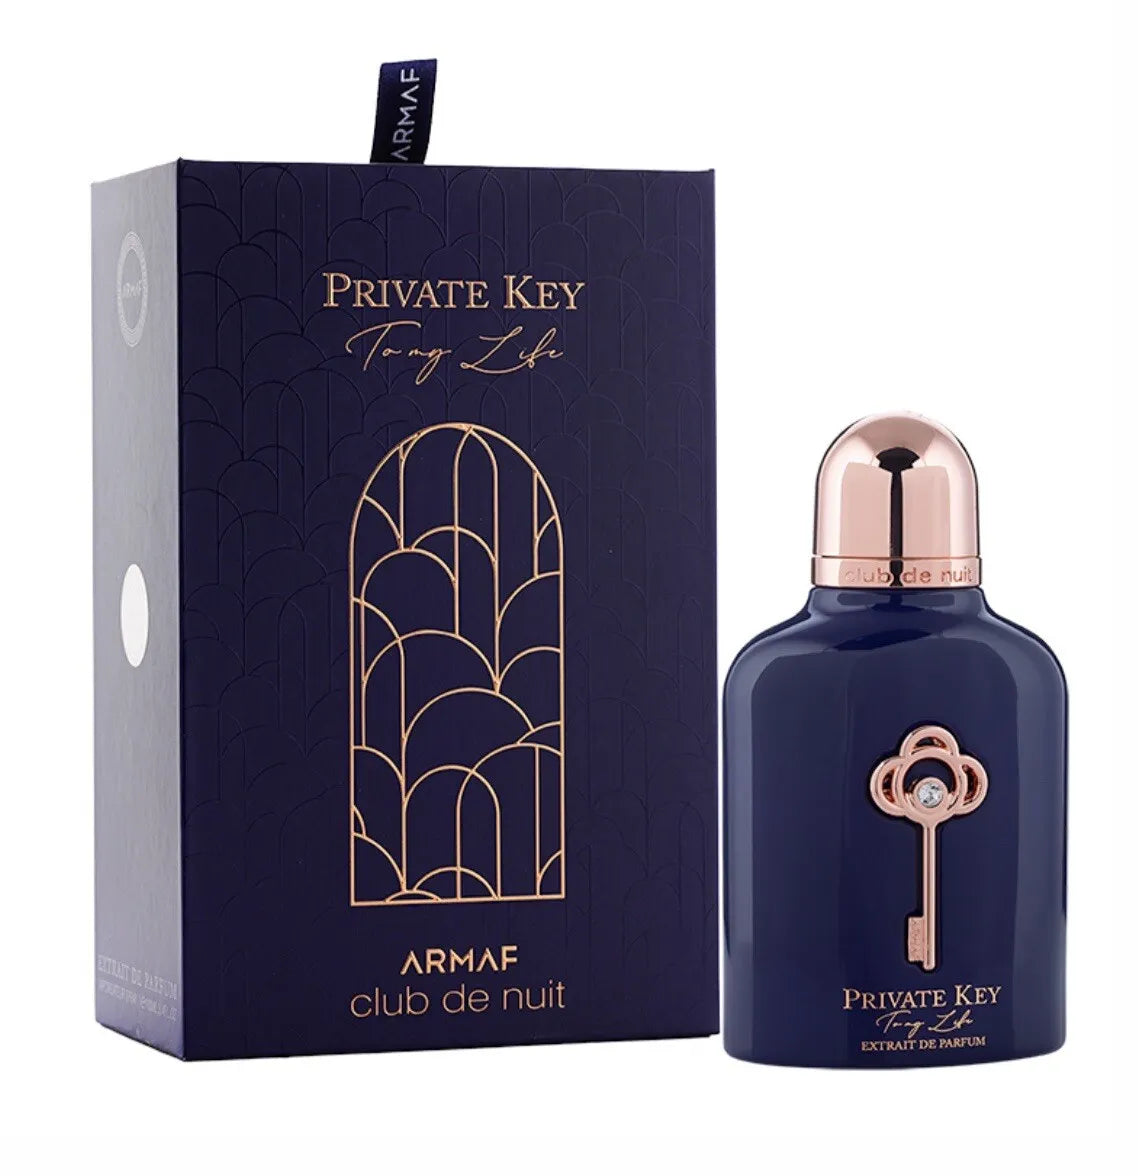 <p data-mce-fragment="1"><em>INSPIRED BY</em> <strong>NISHANE HACIVATE NISHANE</strong></p>
<p data-mce-fragment="1">Immerse yourself in an elegant and sparkling fragrance with Club De Nuit Private Key To My Life. Let the combination of fresh citrus and juicy fruit notes awaken your senses, while a complex floral bouquet and rich base notes transport you to a mystical realm. Passionately believe in the power of this opulent fragrance to enhance your life!</p>